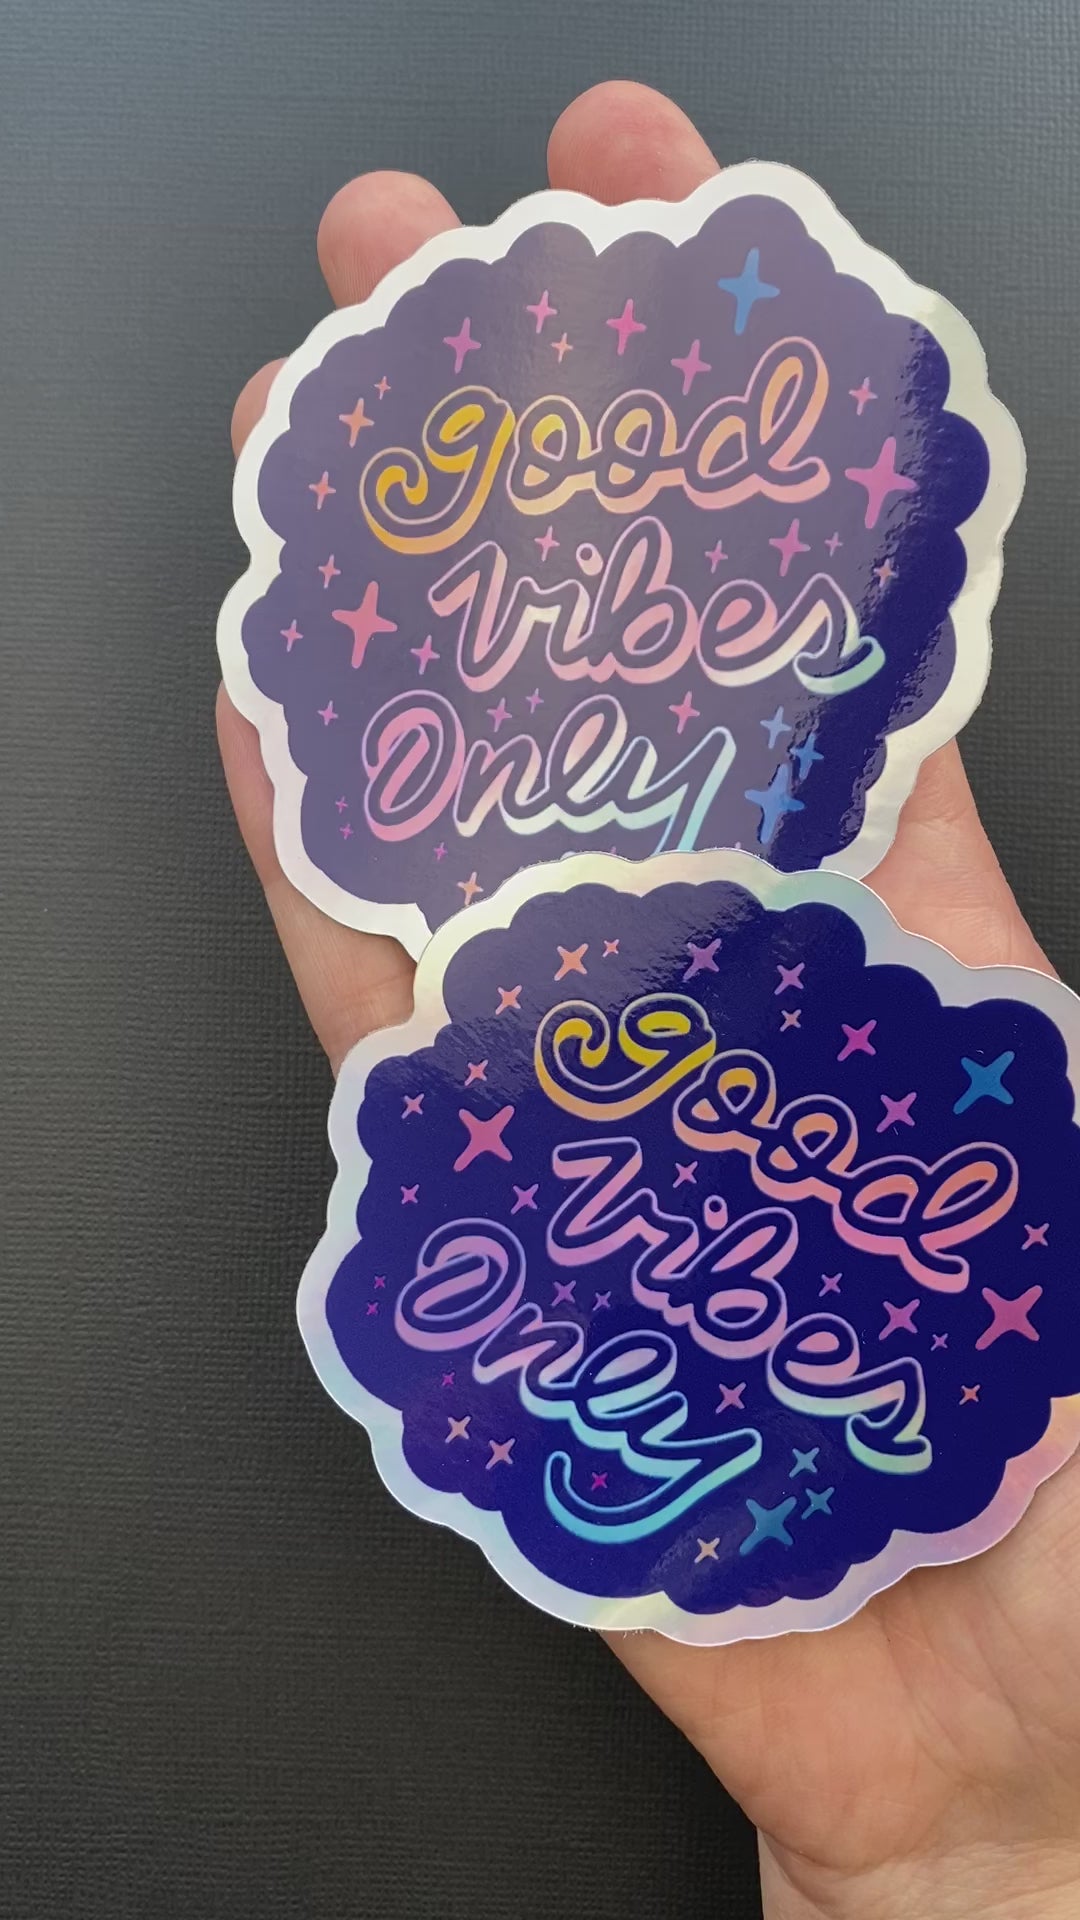 A person's hand holding two holographic "Good Vibes Only" stickers. The hand rotates the stickers to show of their glossy finish and holographic effects.